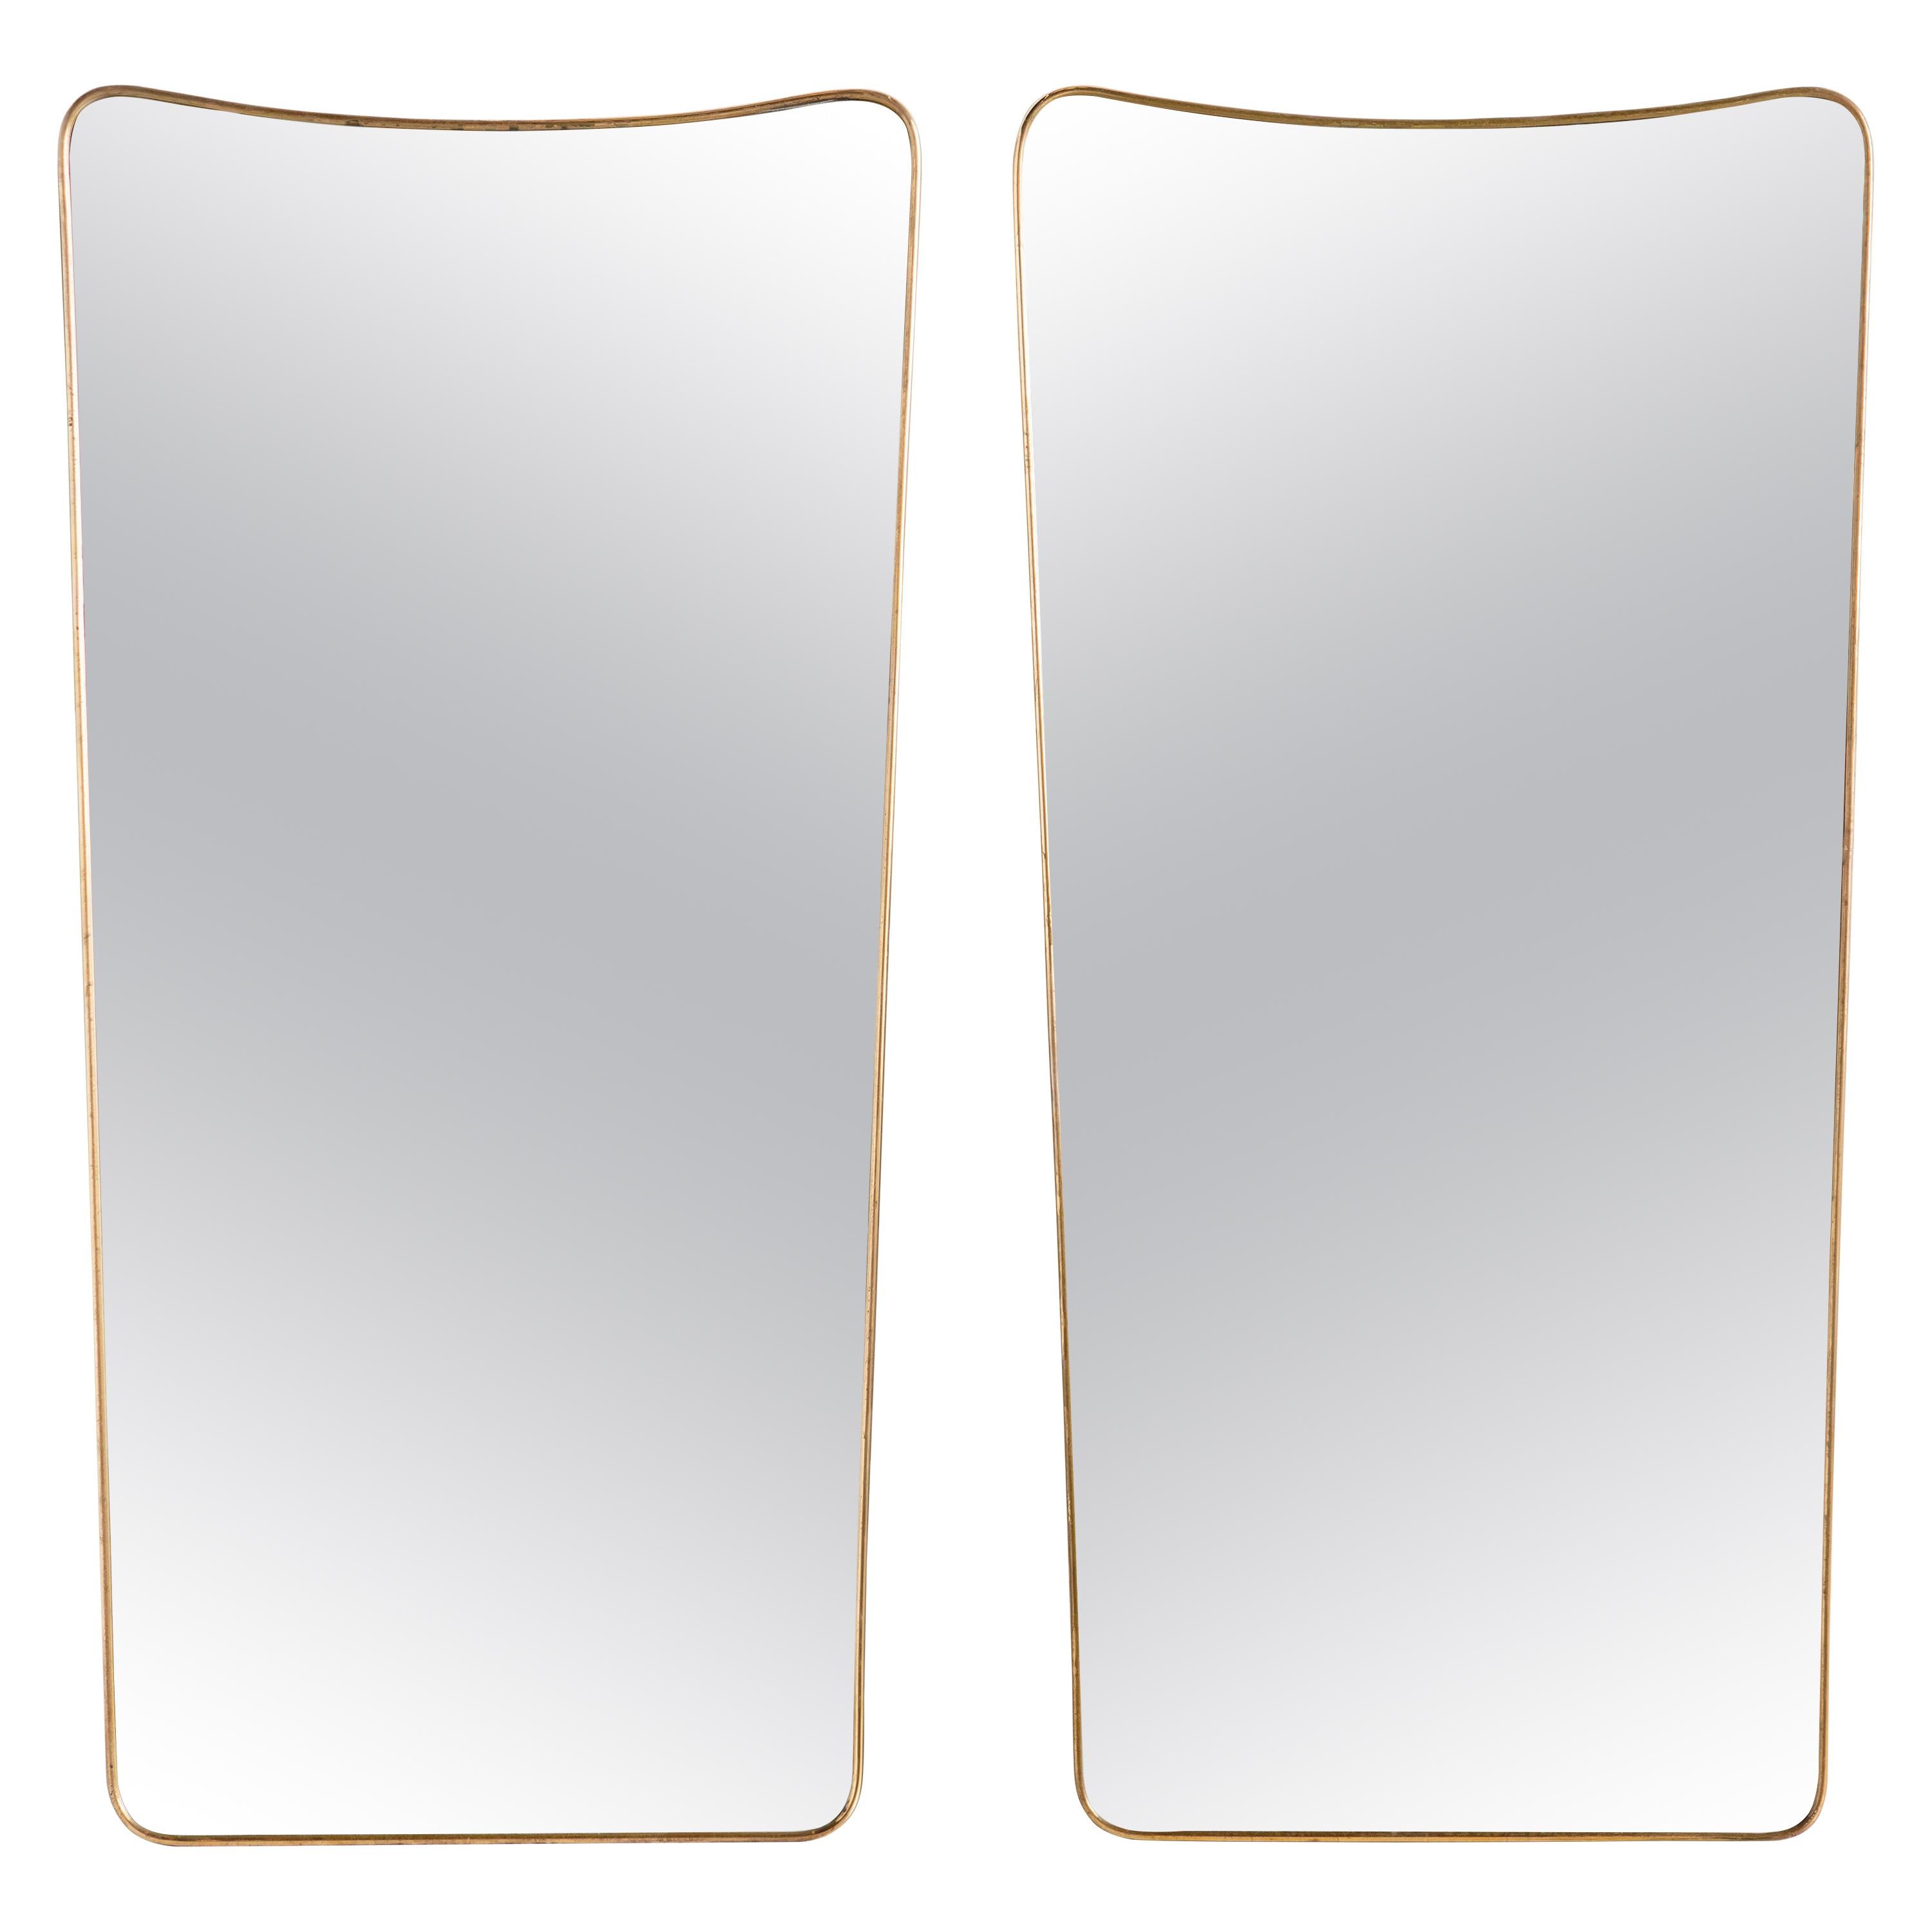 Pair of Vintage Italian Brass Mirrors with Scoop Top